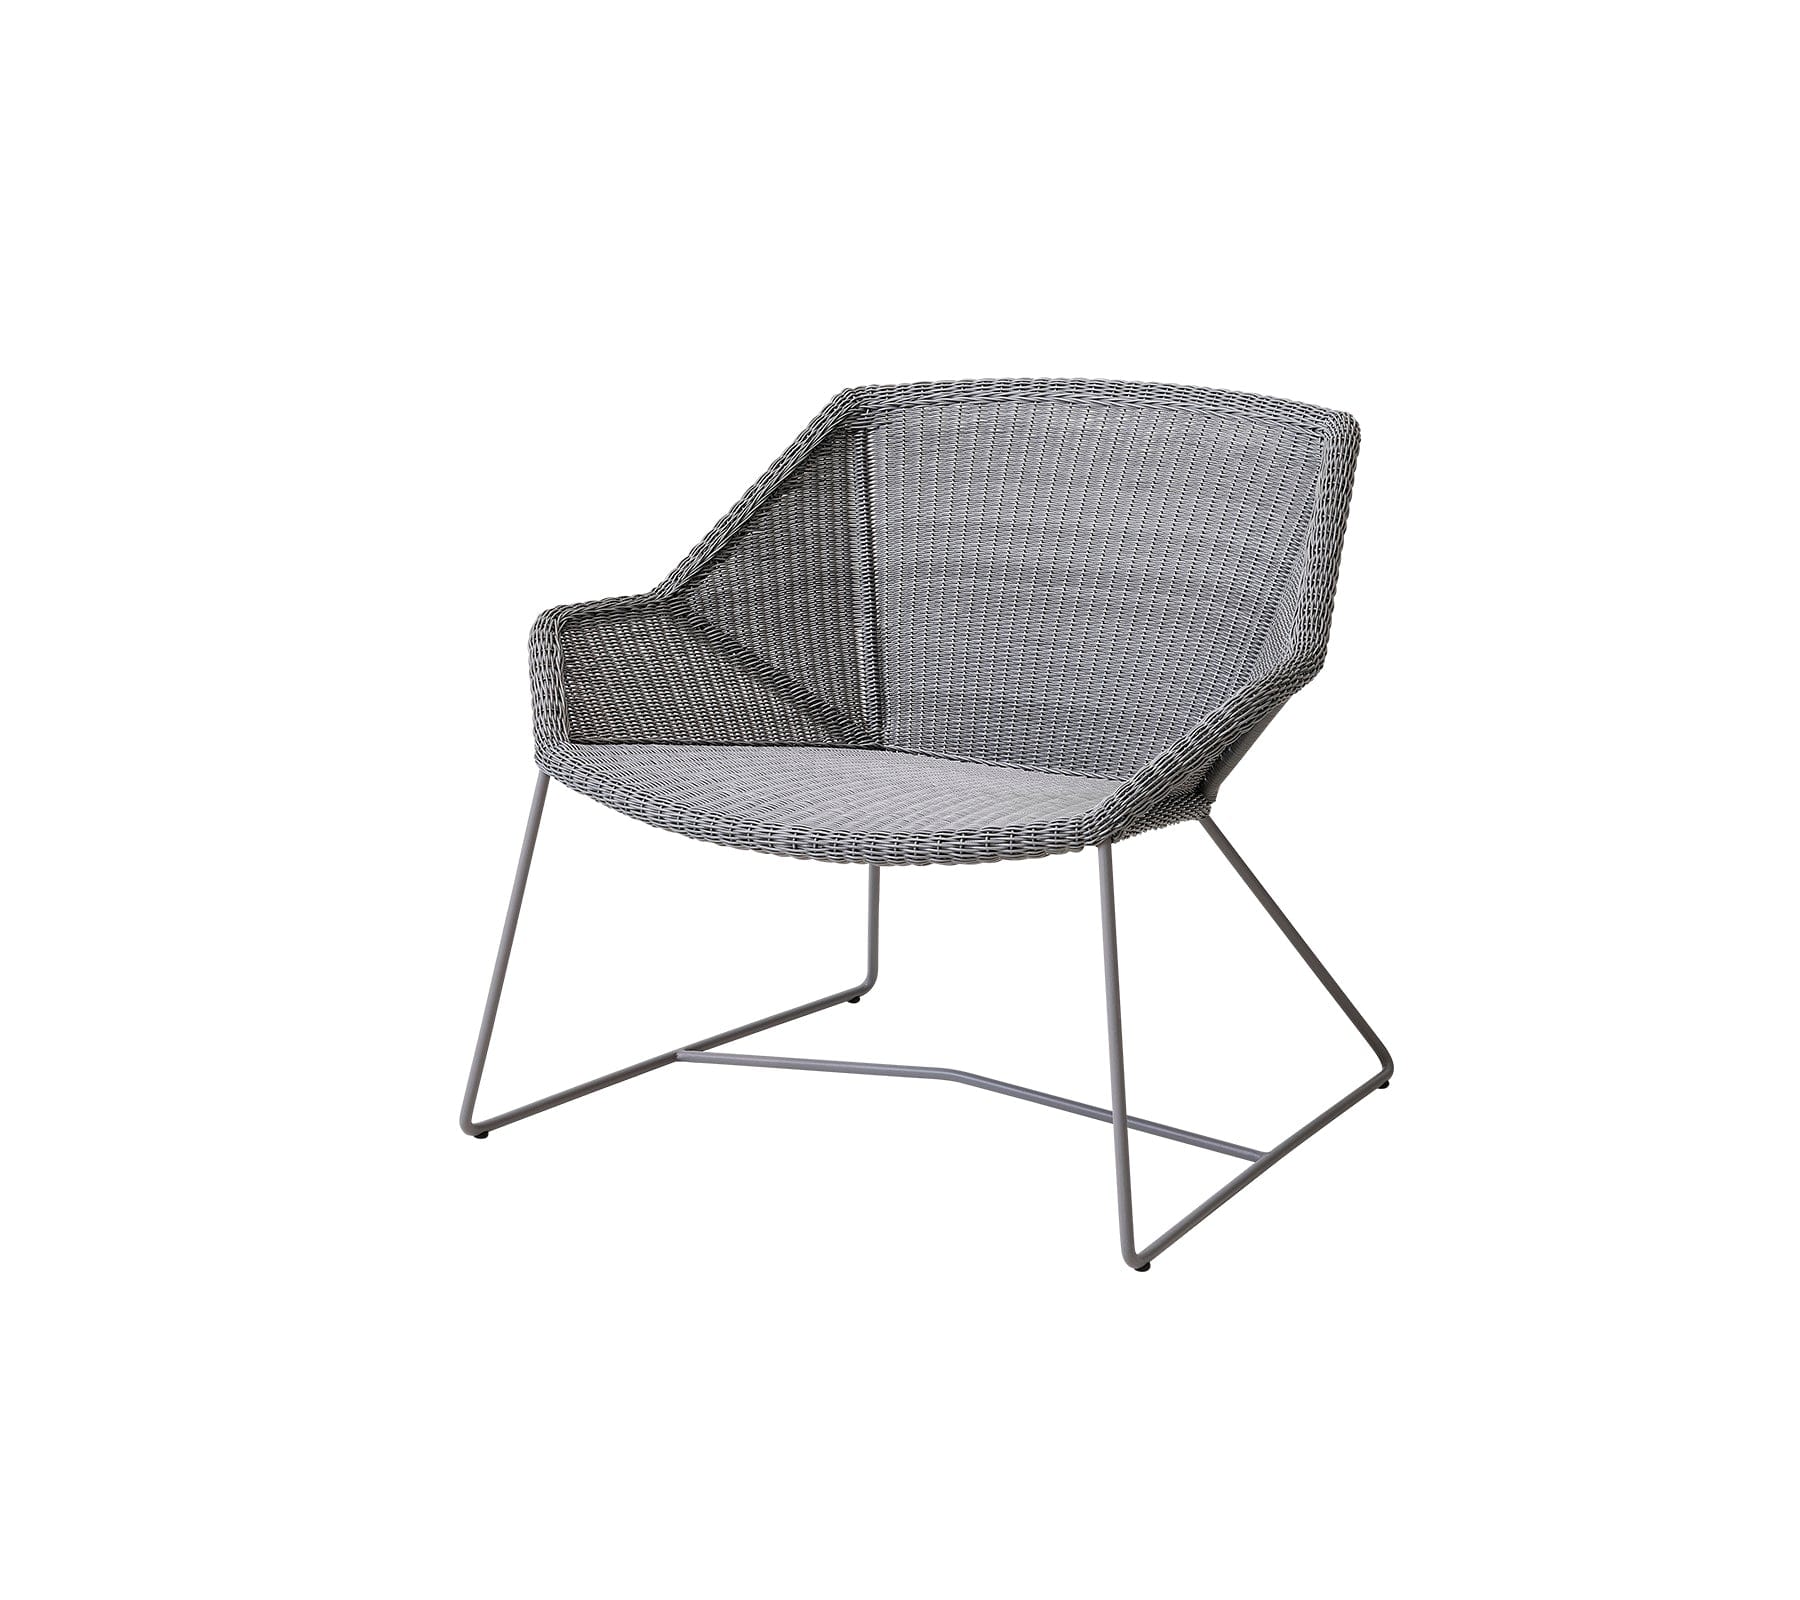 Cane-Line Denmark Lounge Chairs Cane-Line Breeze lounge chair Light grey